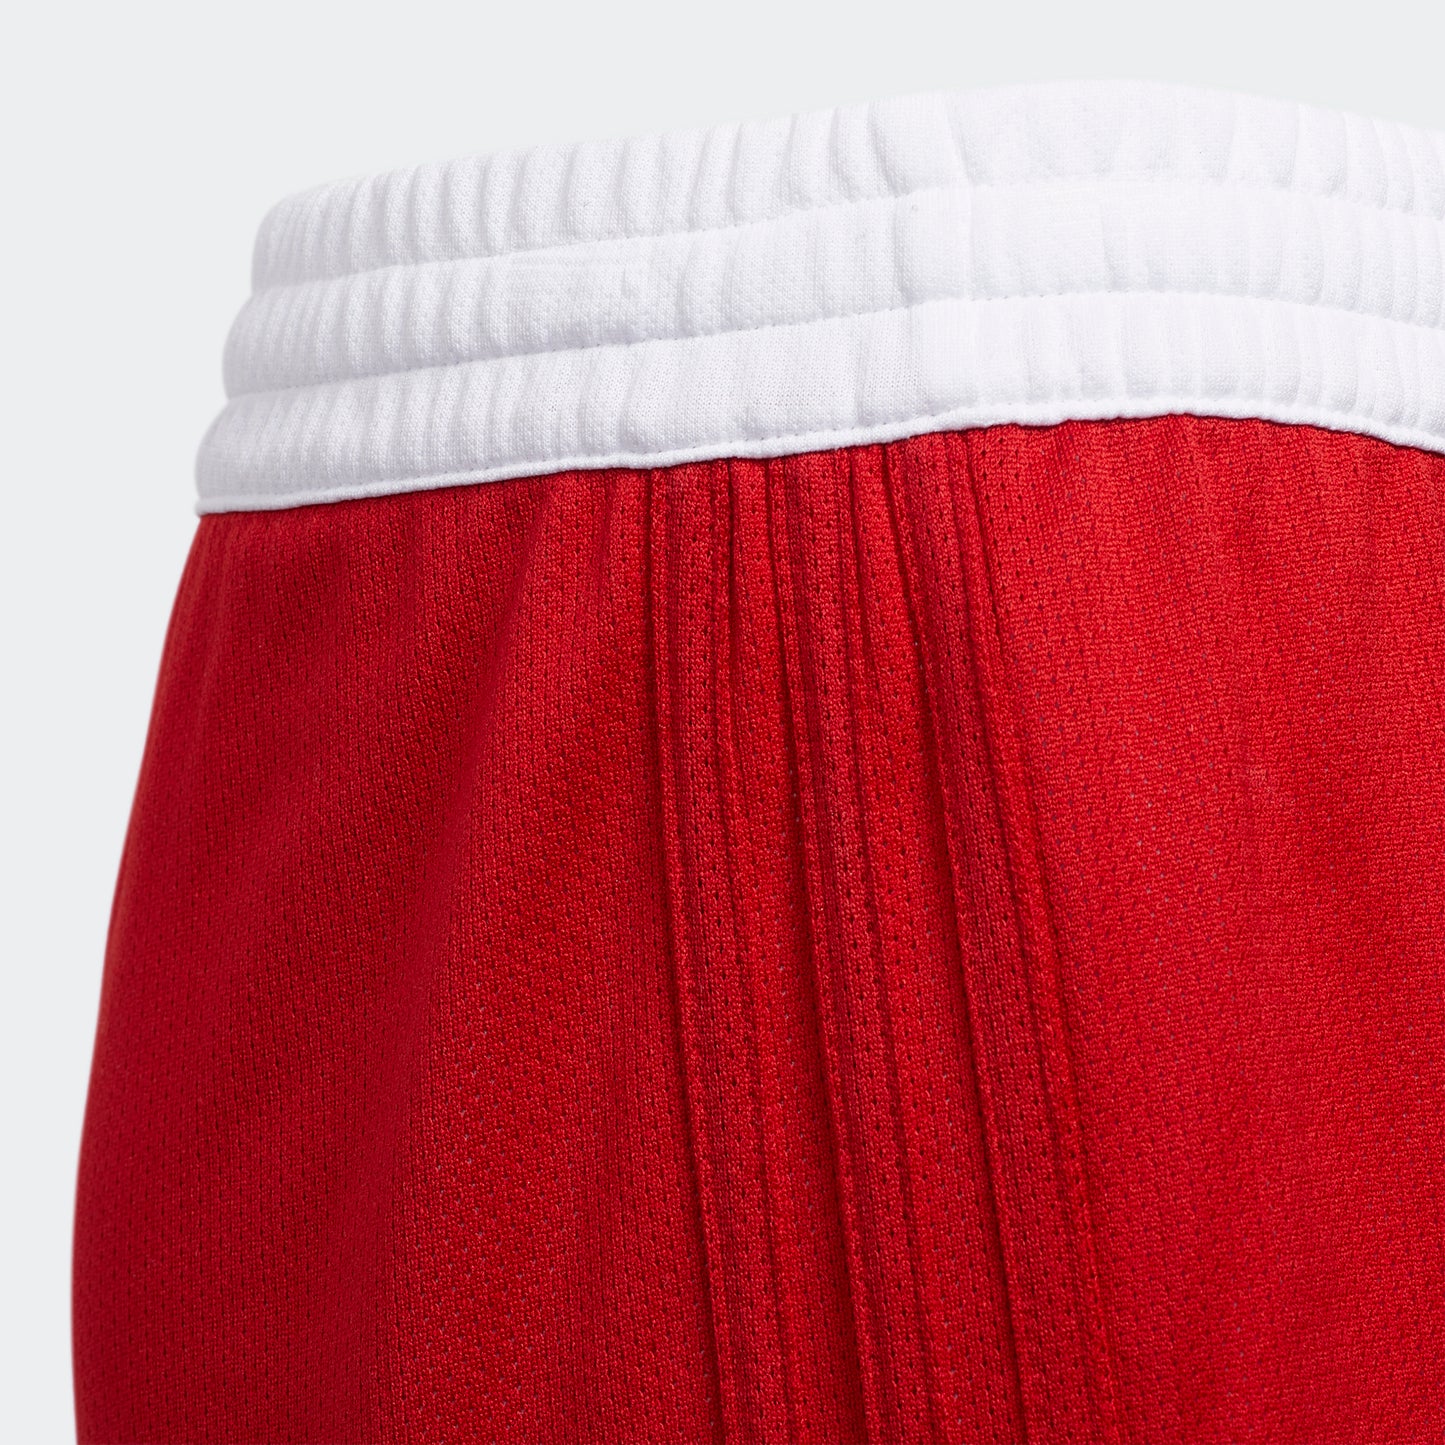 adidas 3G SPEED Reversible Basketball Shorts | Power Red-White | Youth